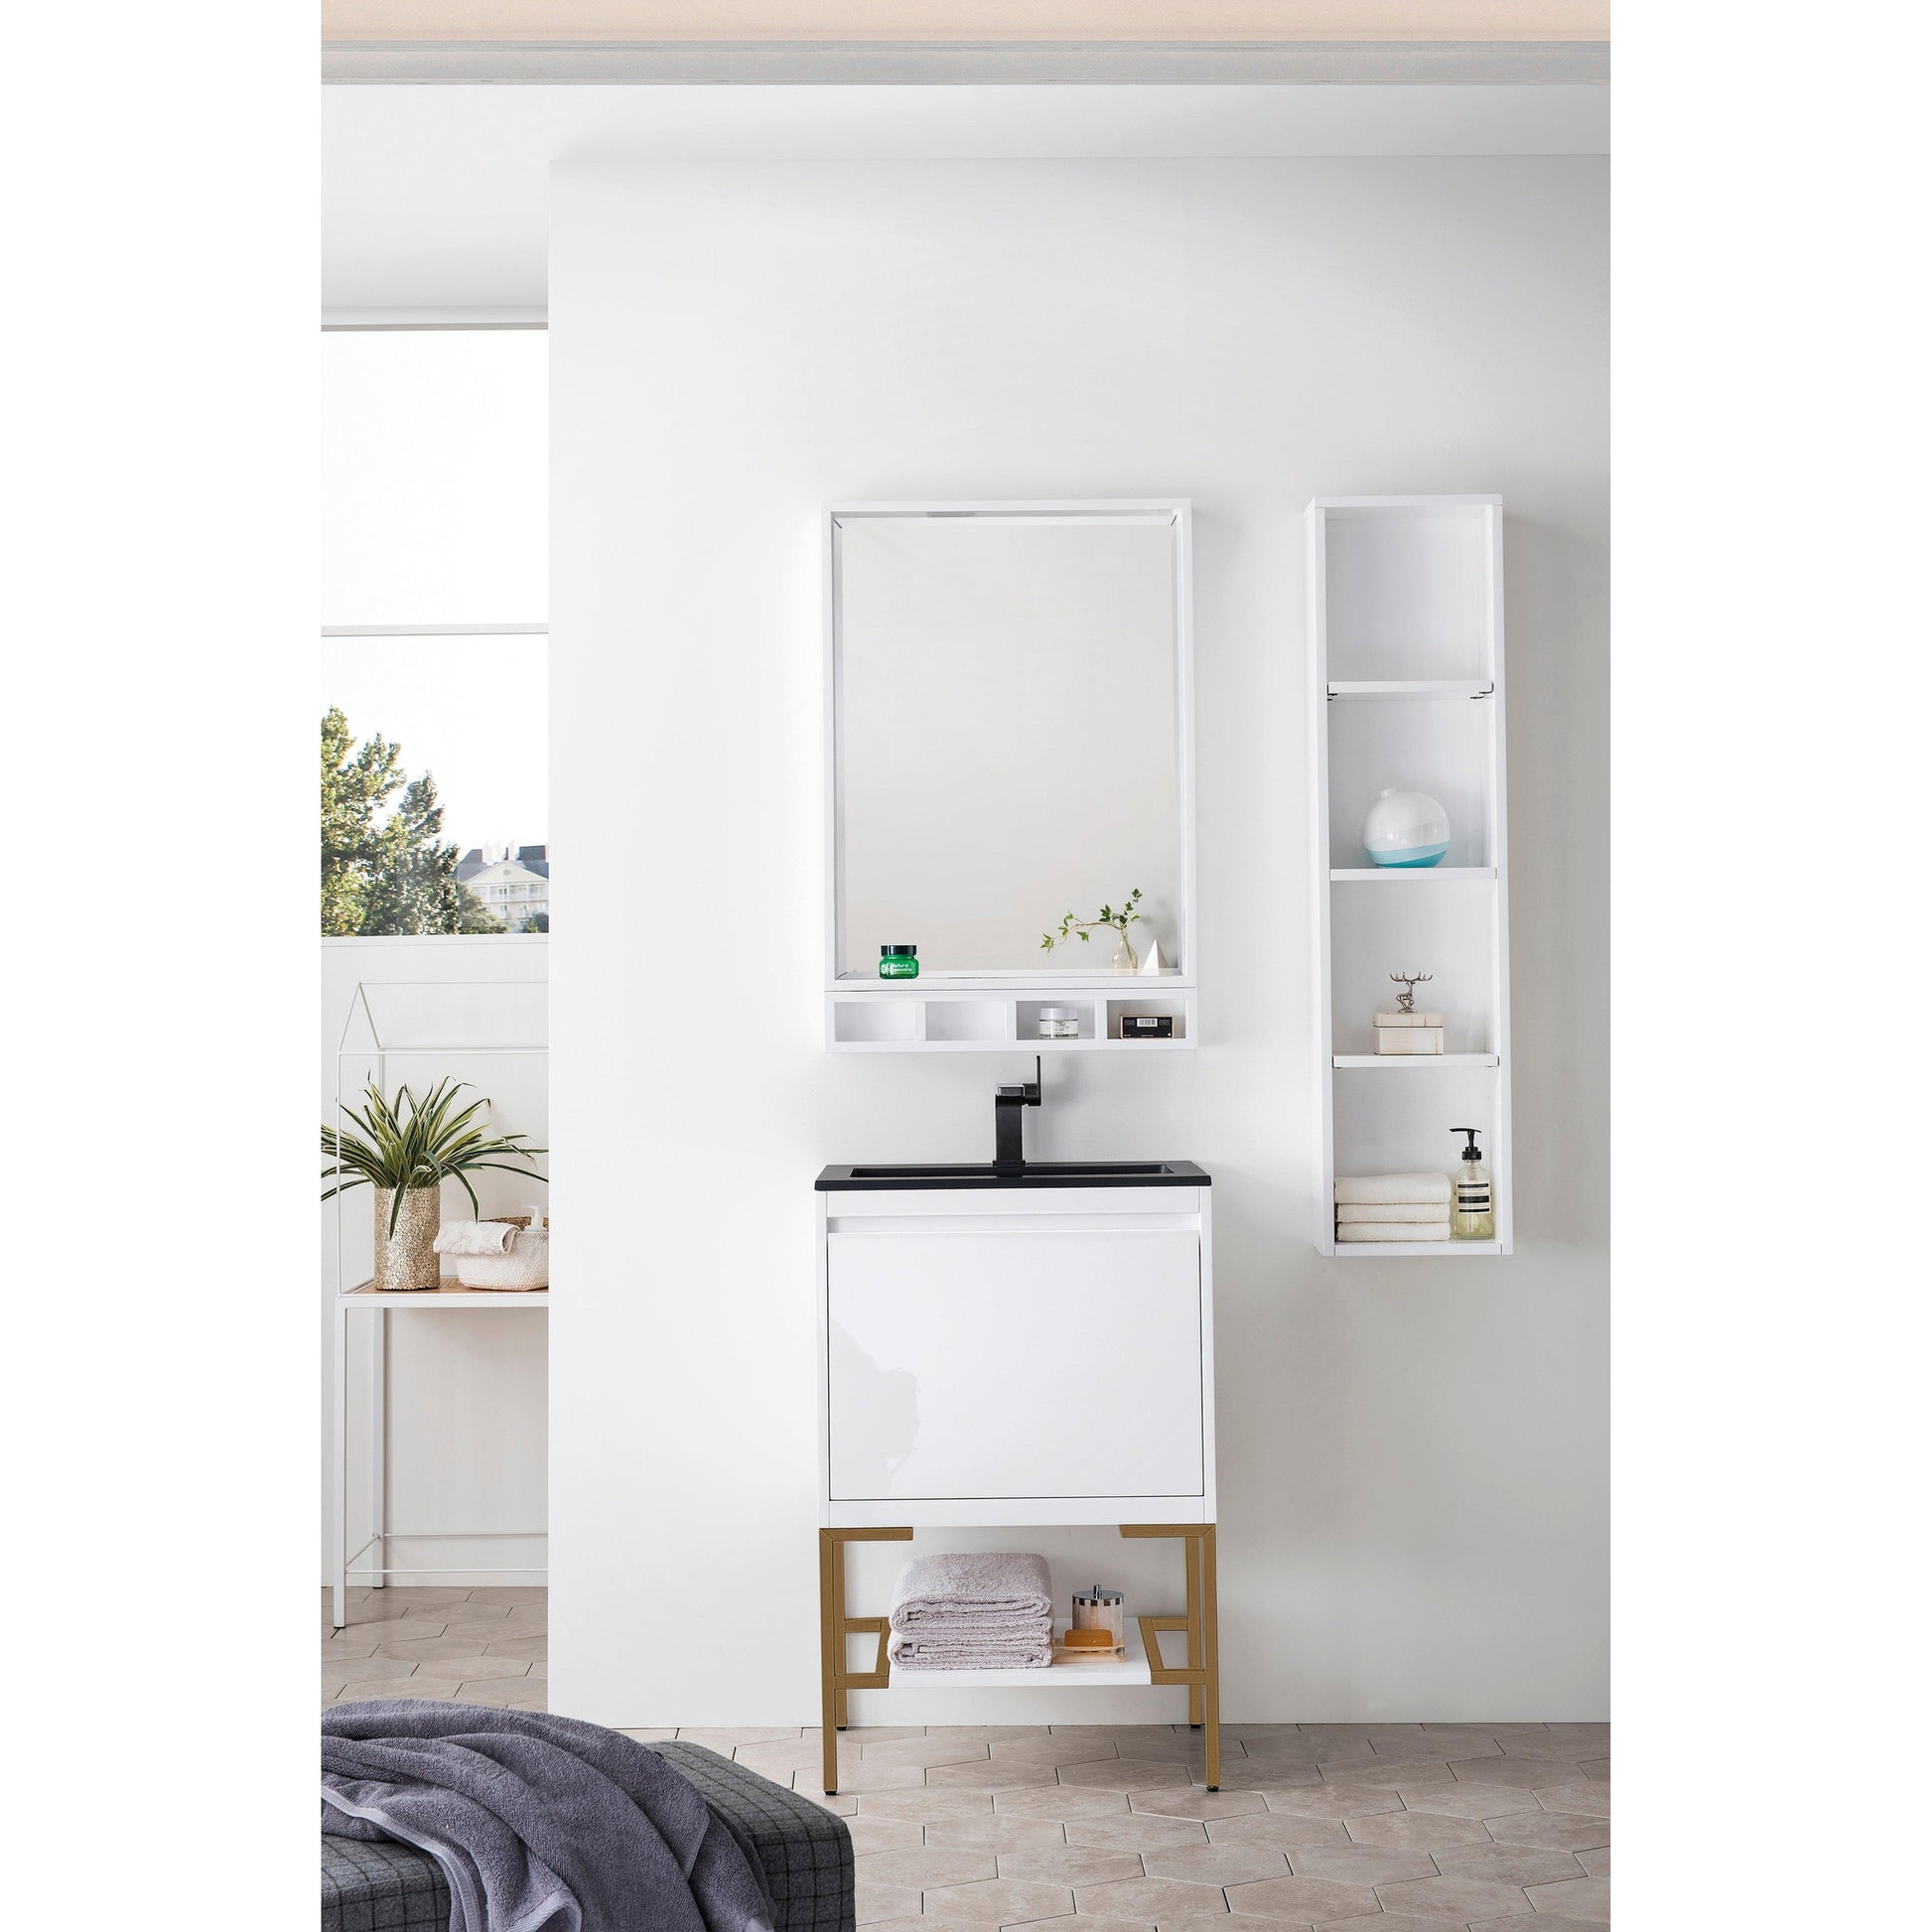 James Martin Vanities Milan 23.6" Glossy White, Radiant Gold Single Vanity Cabinet With Charcoal Black Composite Top